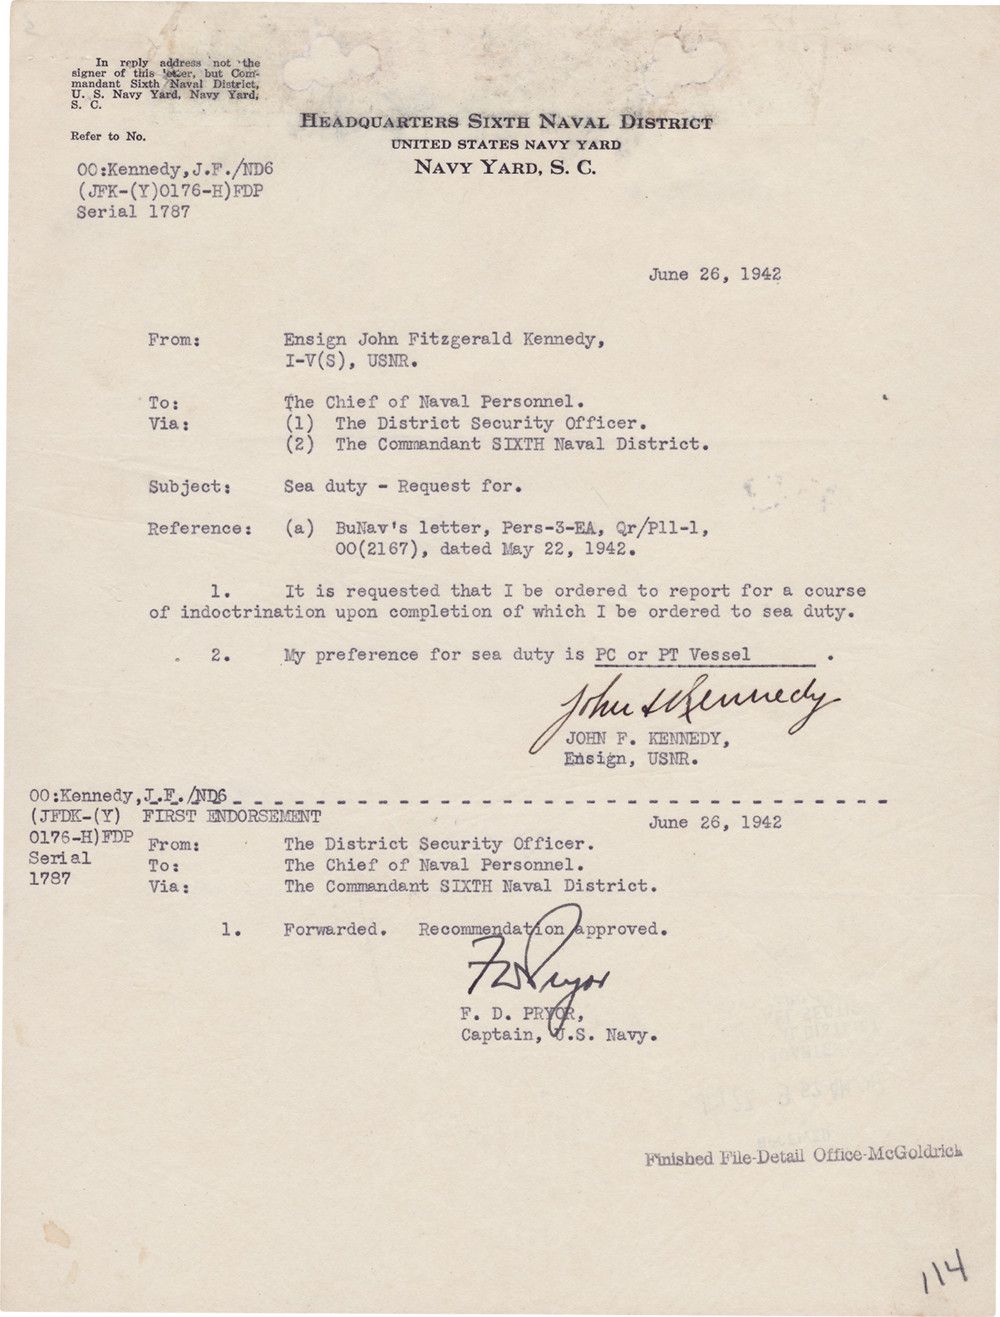 In 1942, Ensign J.F. Kennedy Requests Sea Duty on a PT Vessel: "Recommendation Approved"